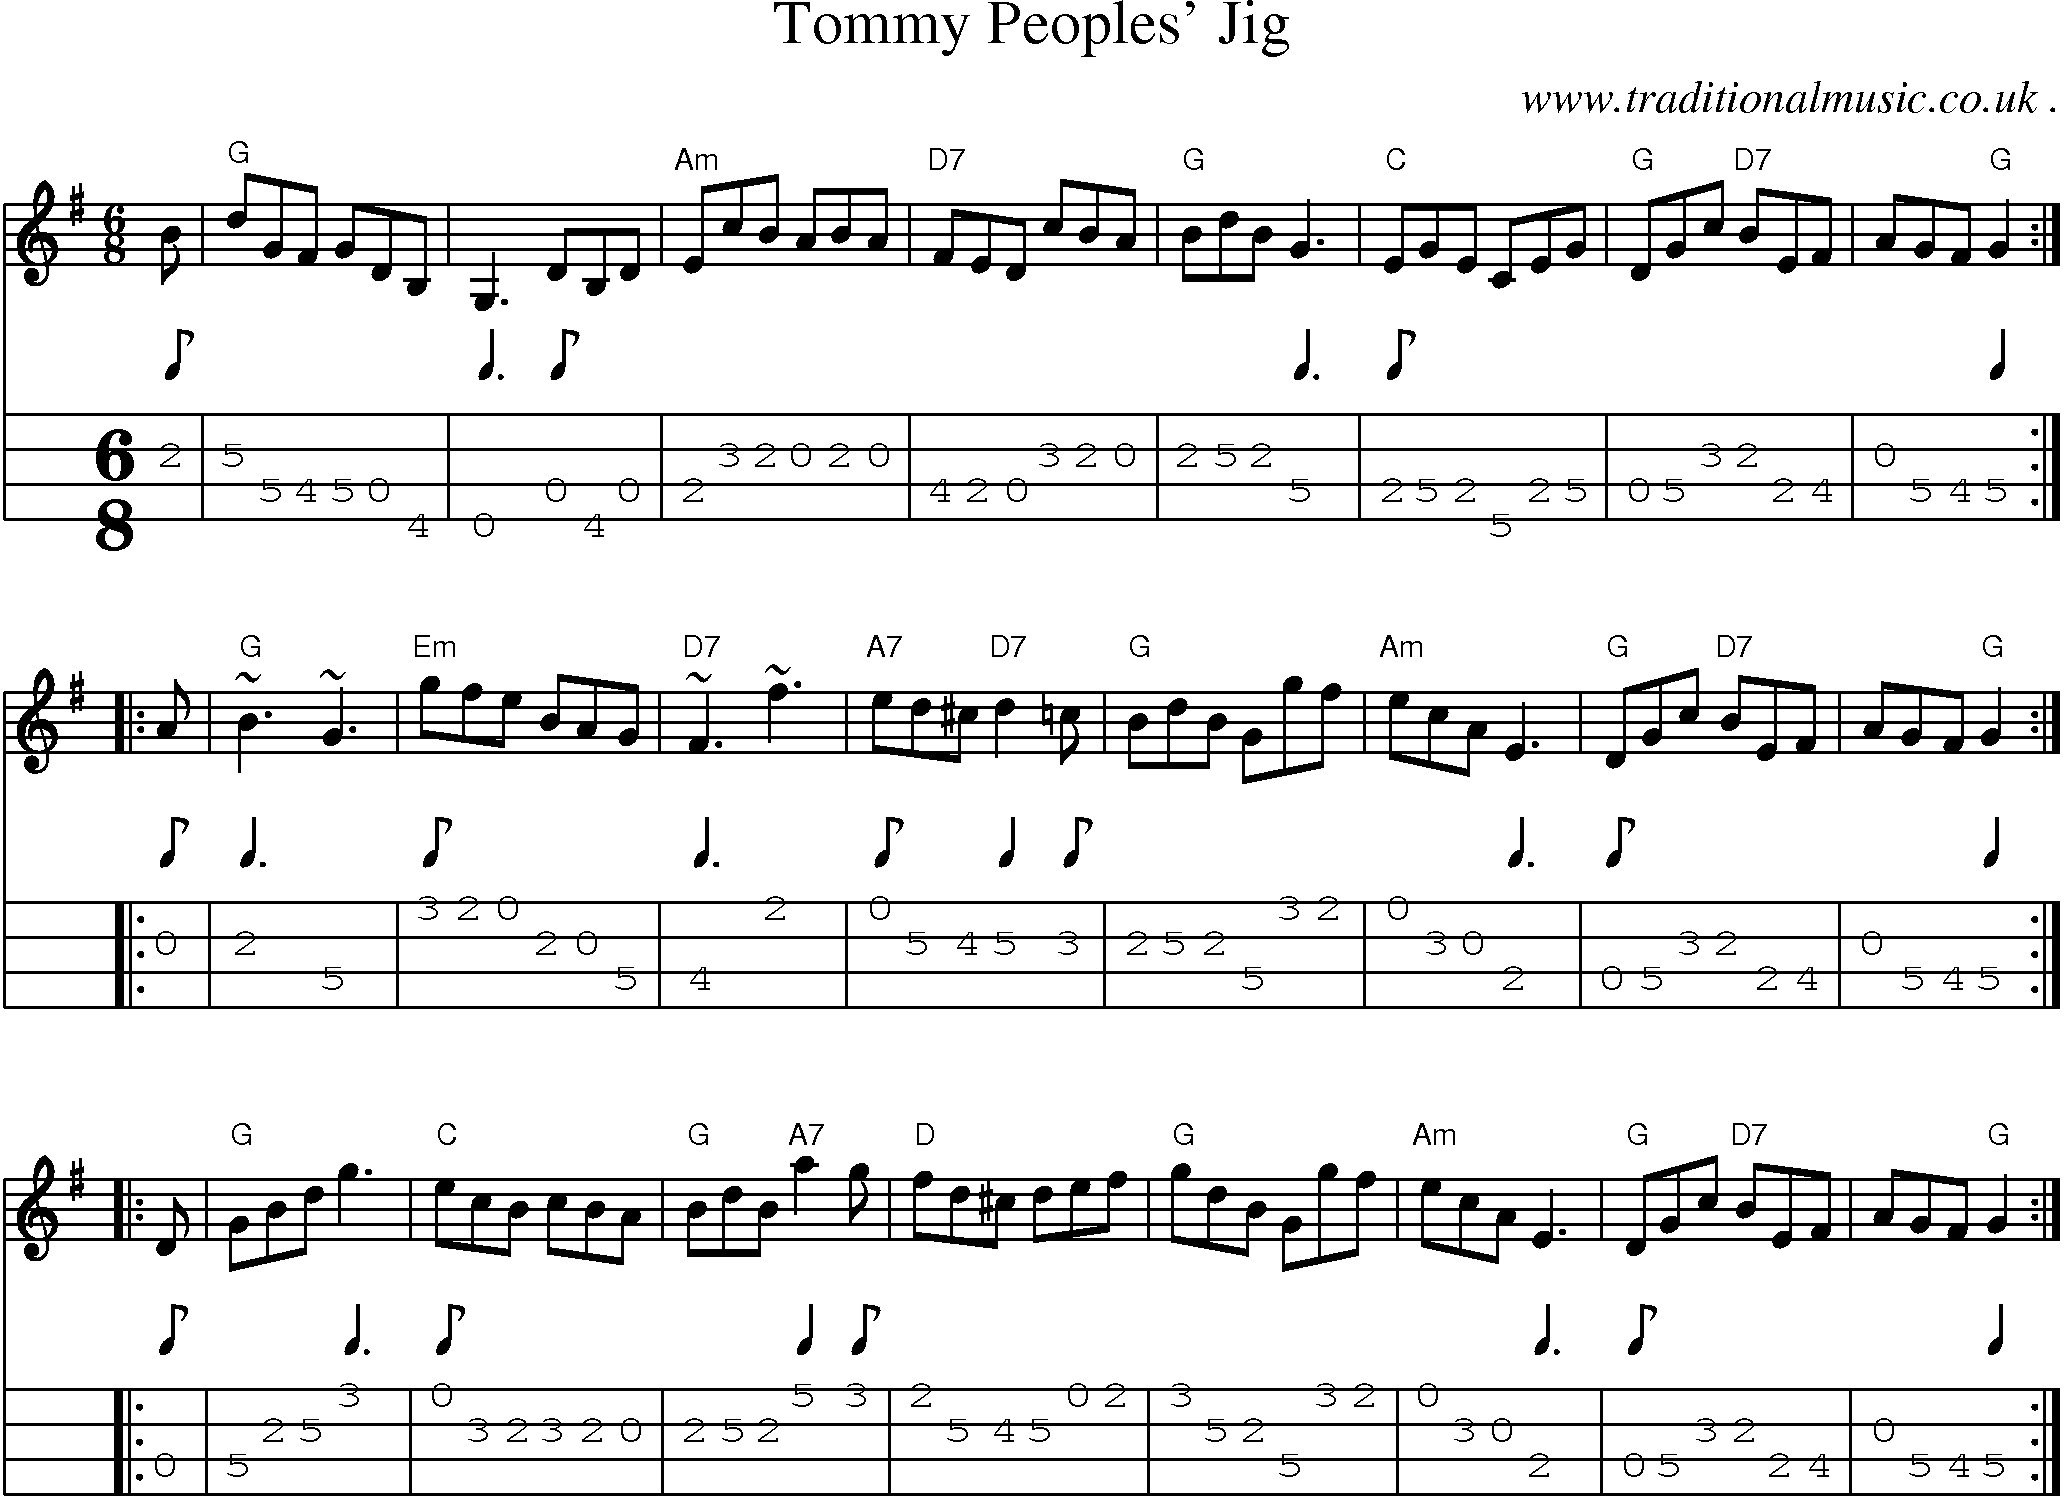 Sheet-music  score, Chords and Mandolin Tabs for Tommy Peoples Jig